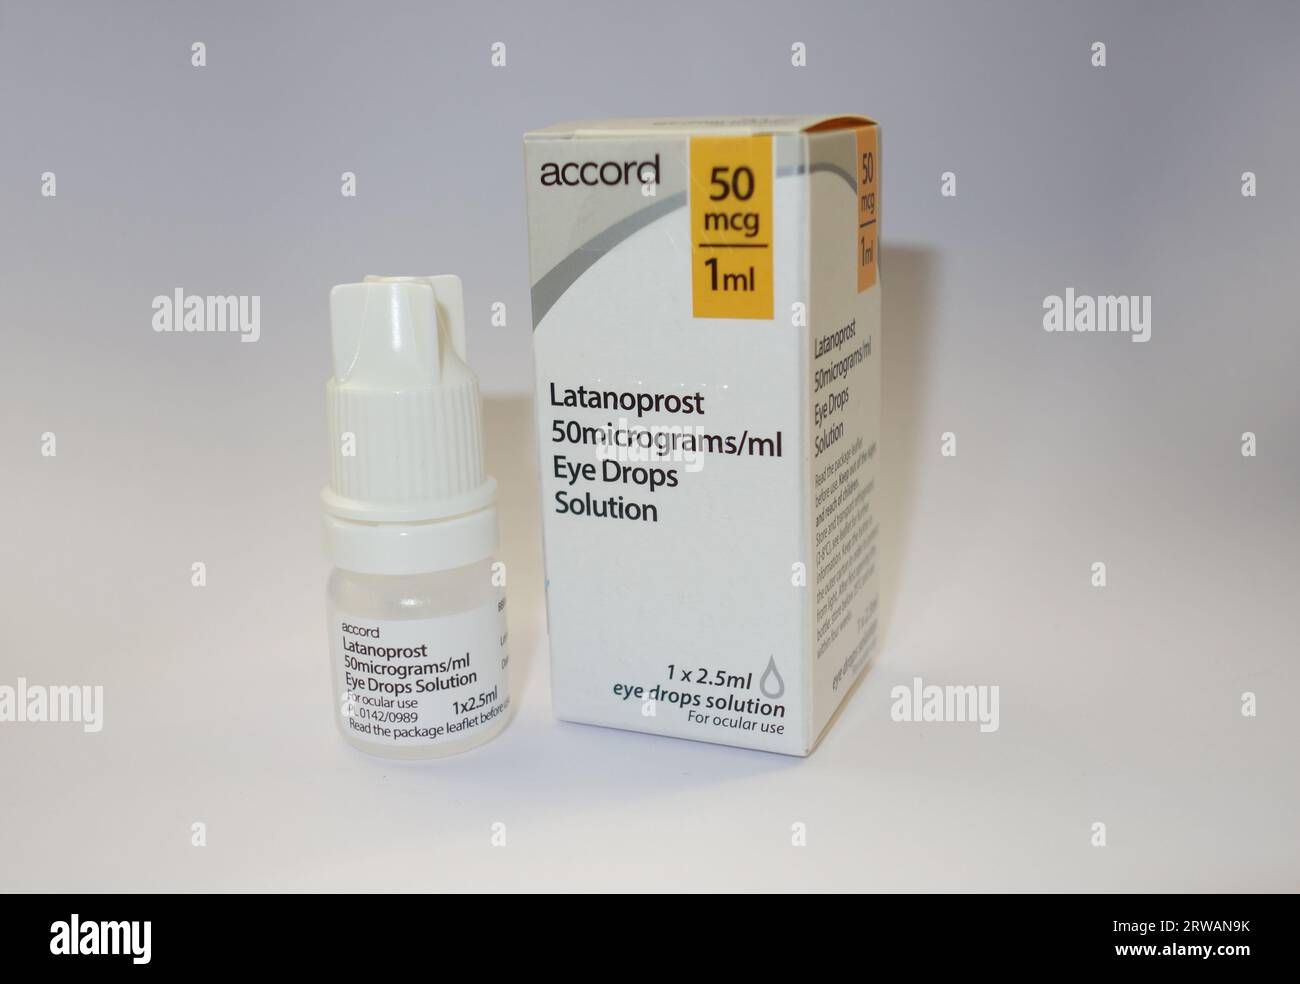 Box & Bottle of Latanoprost 50mg/ml + 1mg/ml Eye Drop Solution by  Accord to Treat Glaucoma and Ocular Hypertension. Stock Photo